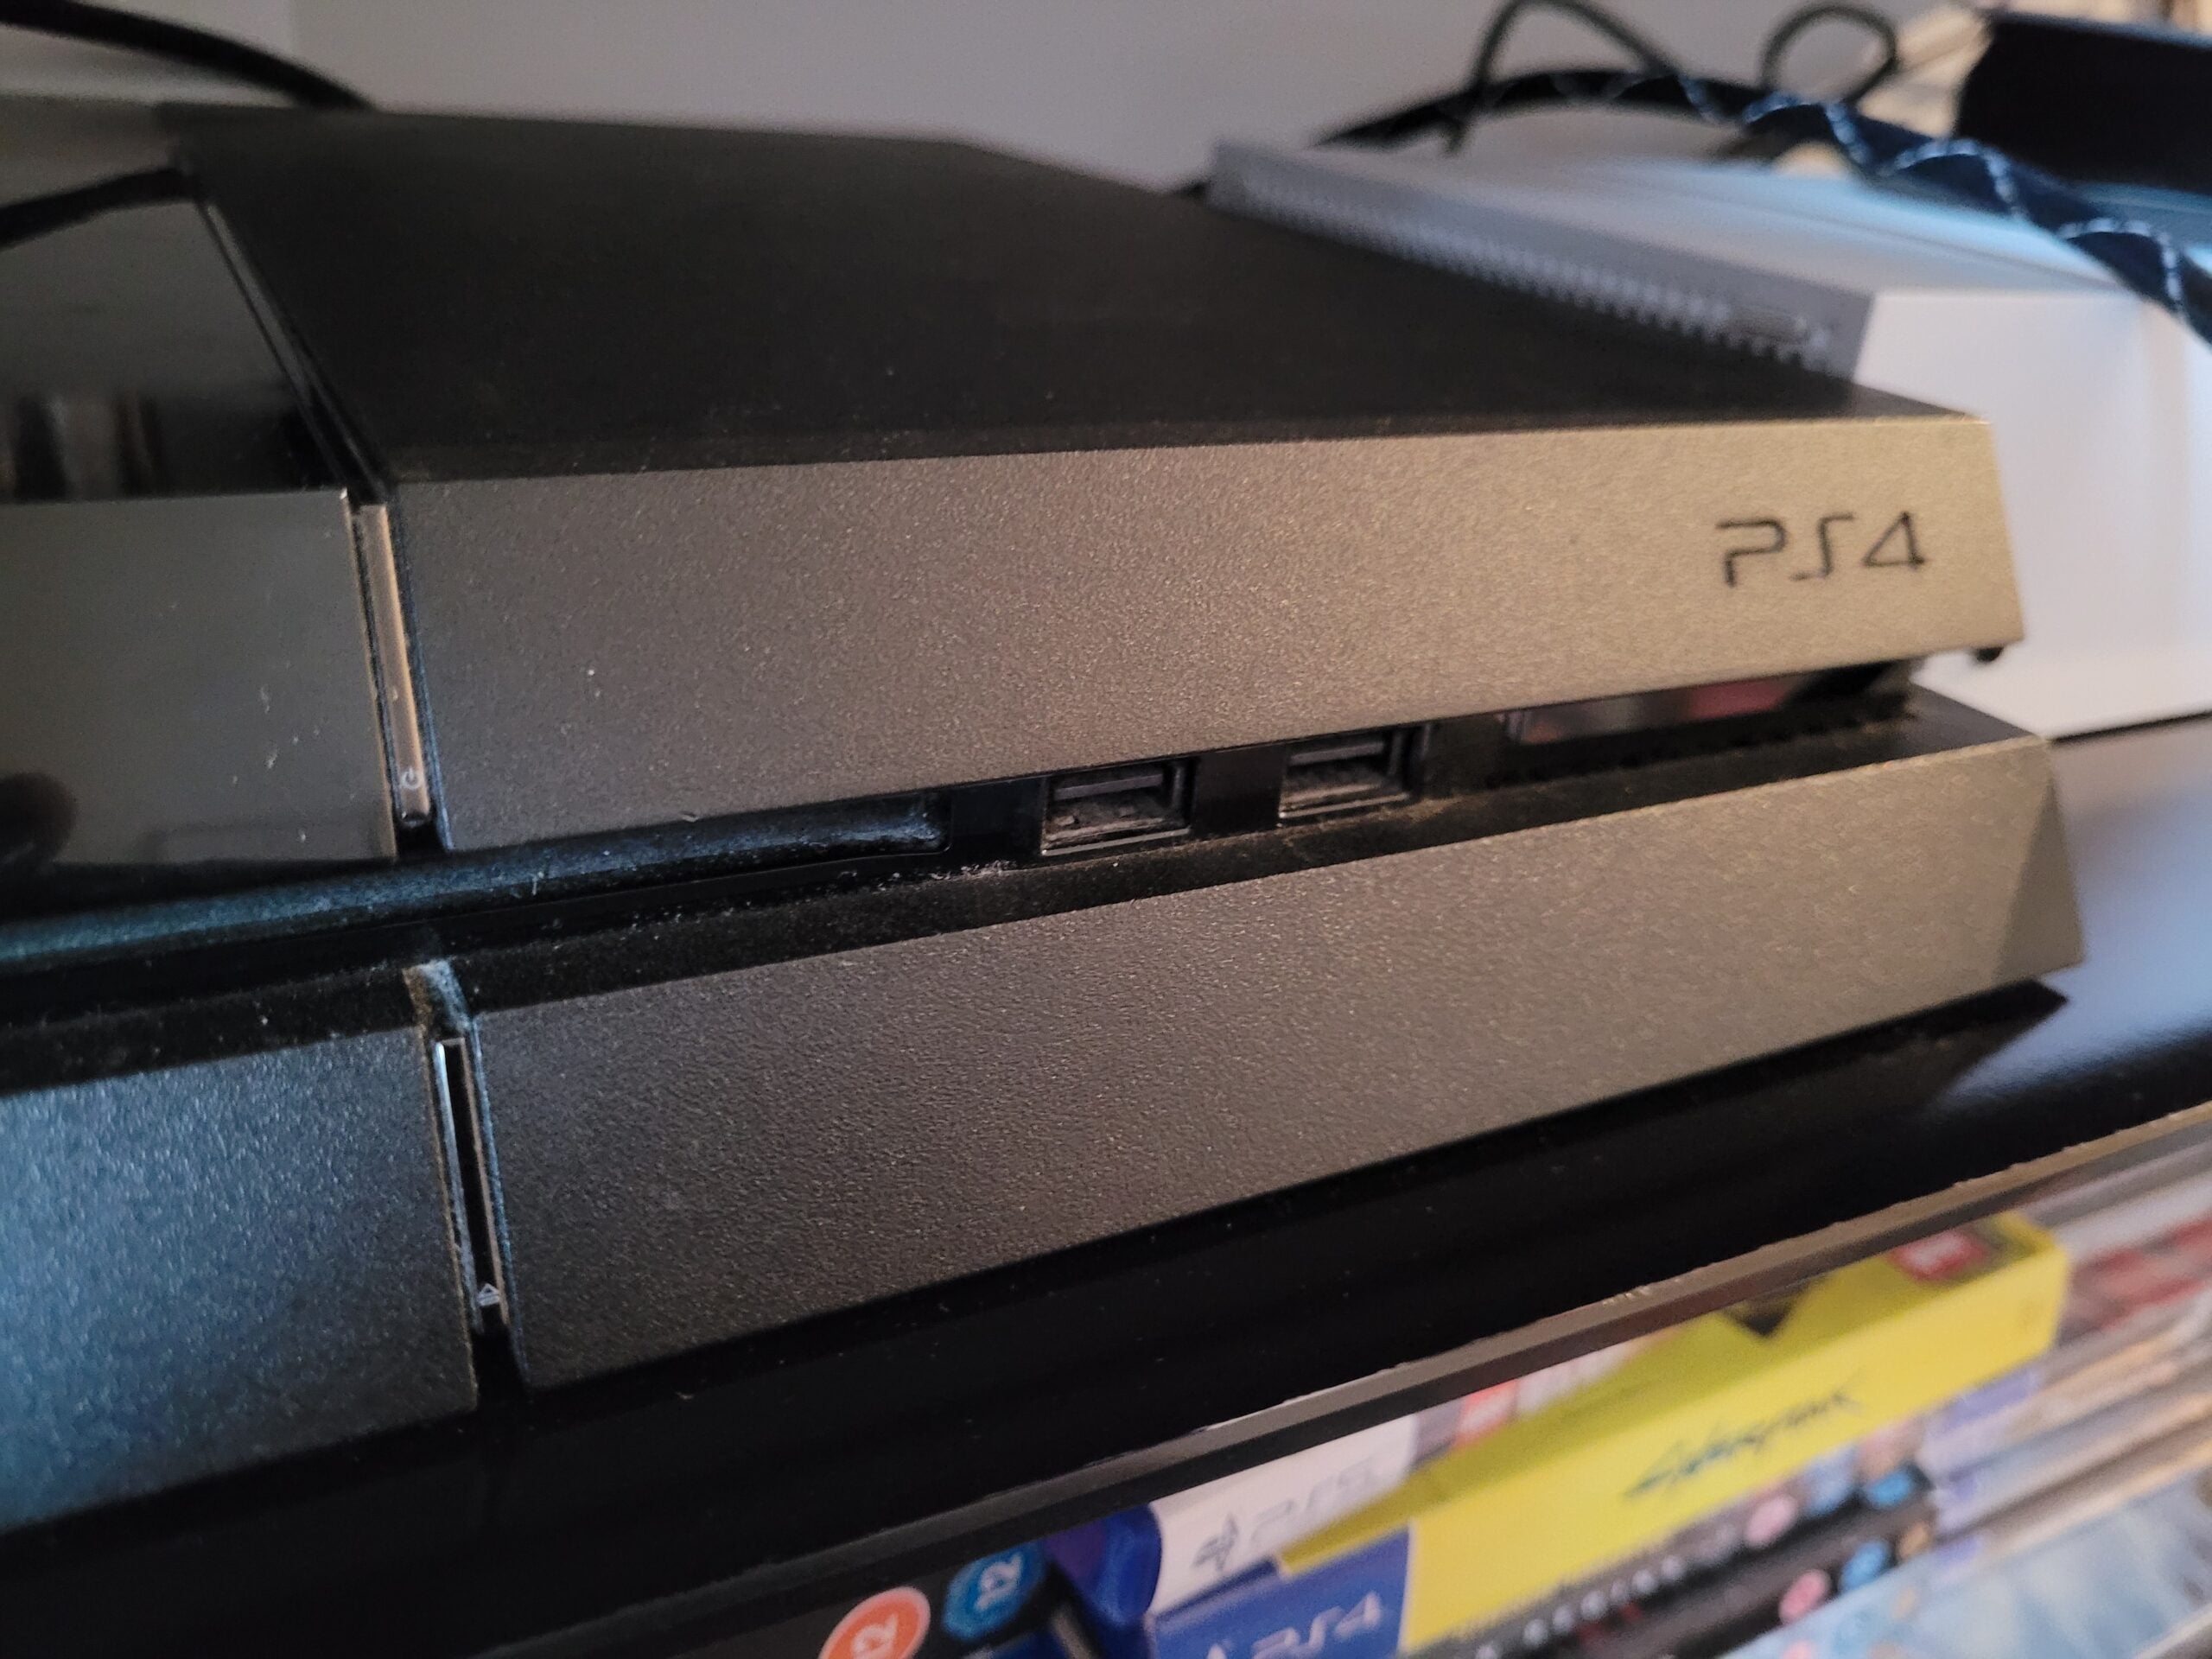 How to reset your PS4